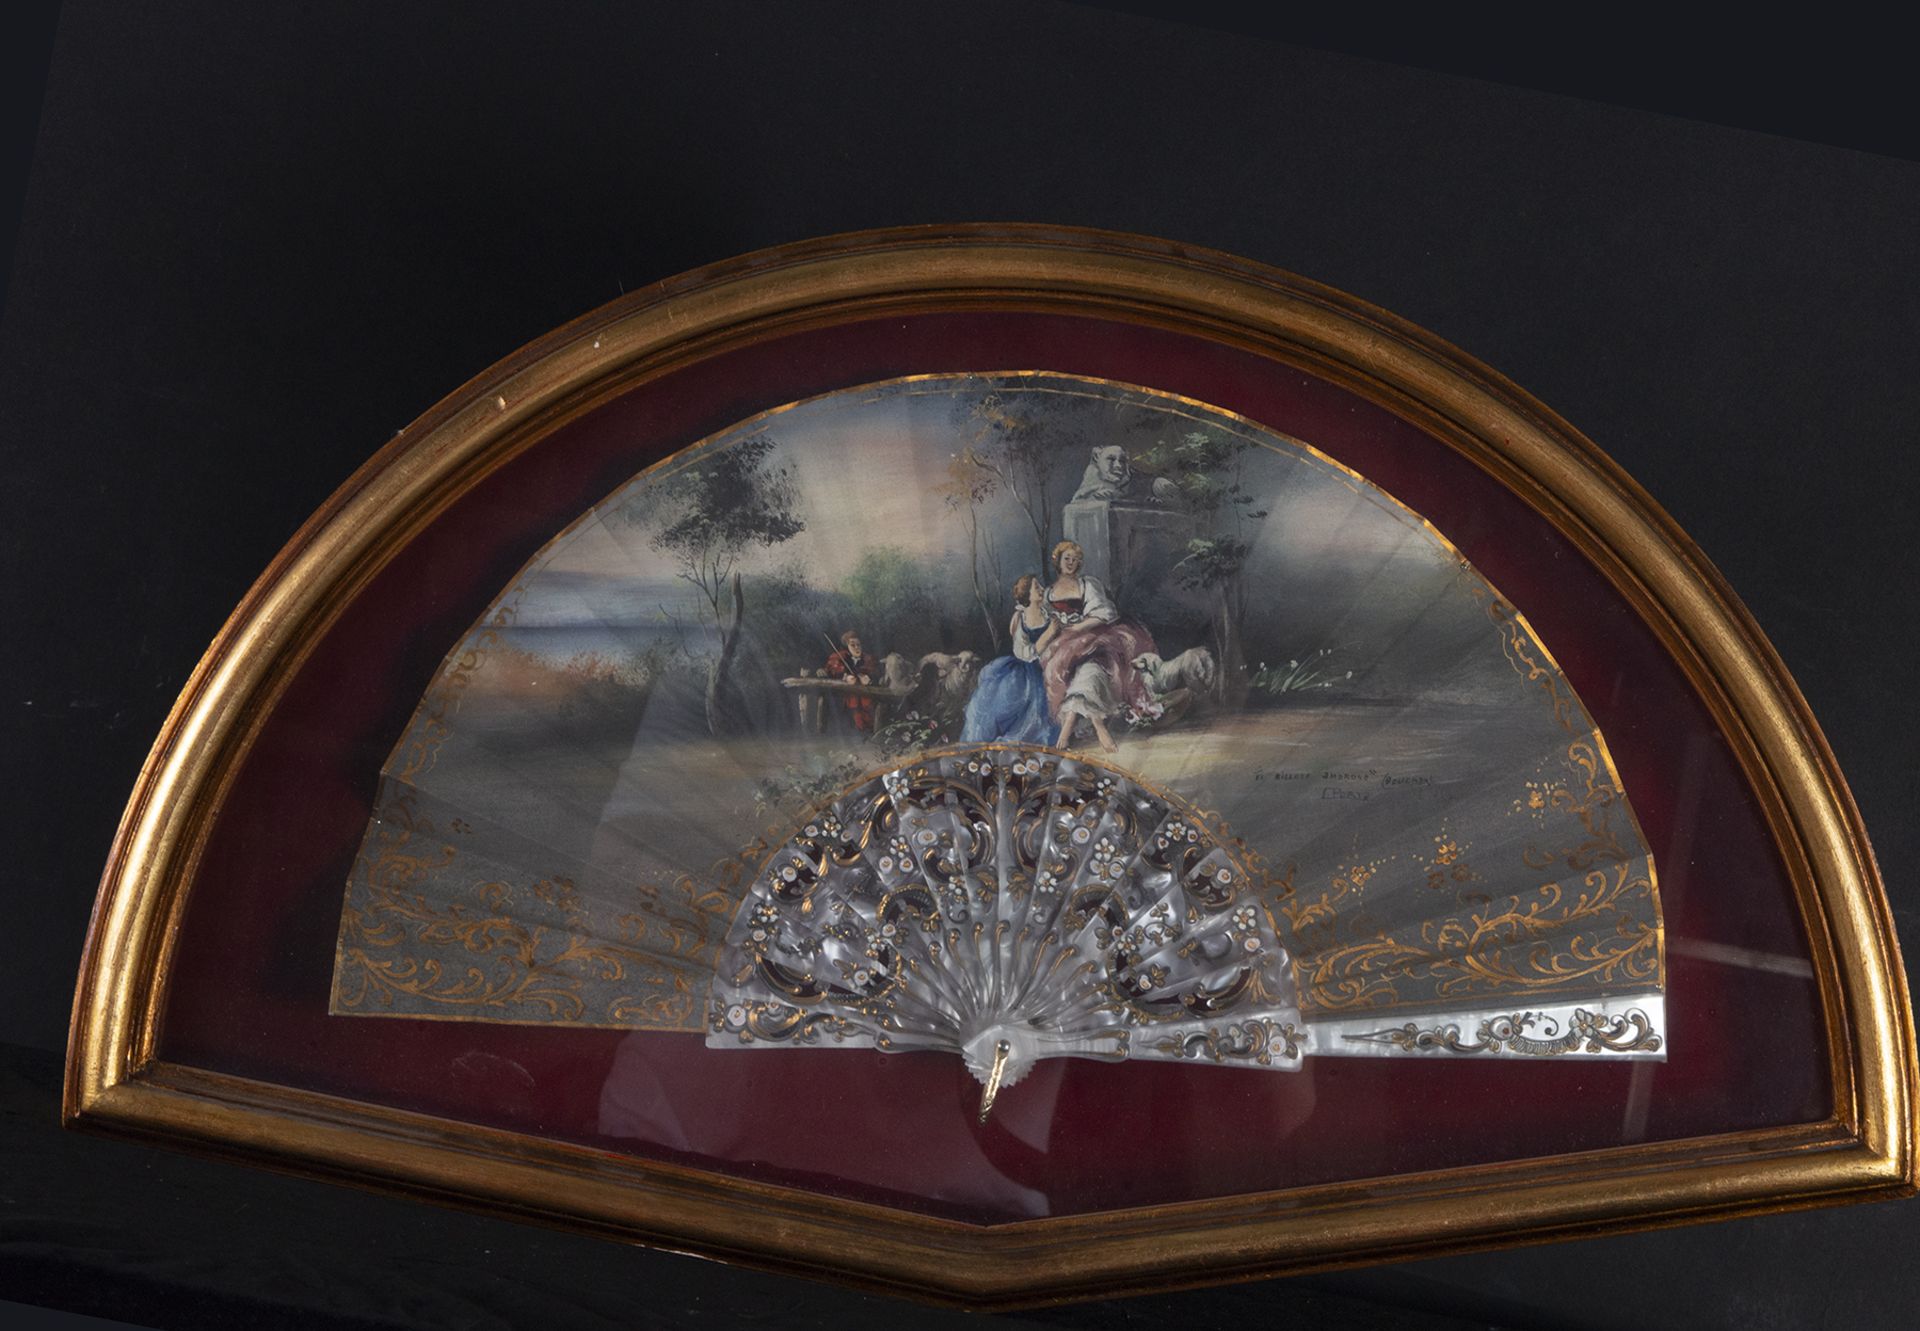 Elizabethan Fan with Gallant Scene Representing the Amorous Bill by François Boucher, 18th century